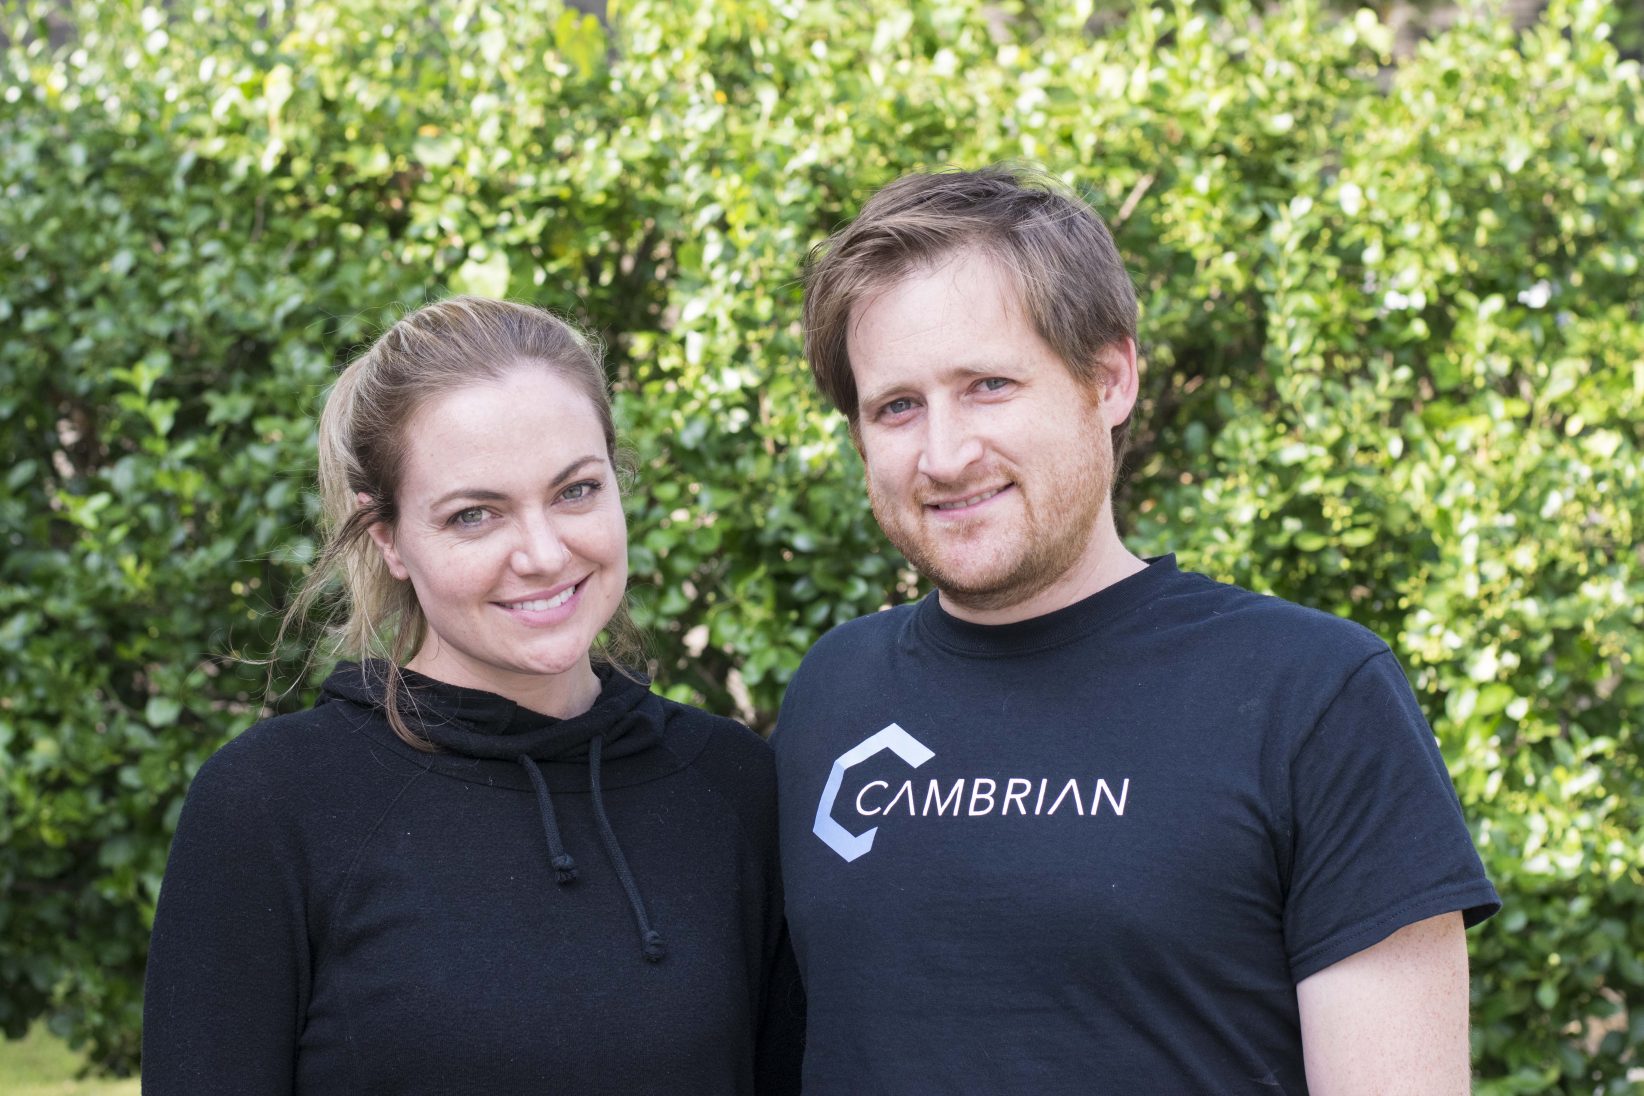 LaunchKC $100K winner Cambrian Tech taking simple idea to new reality